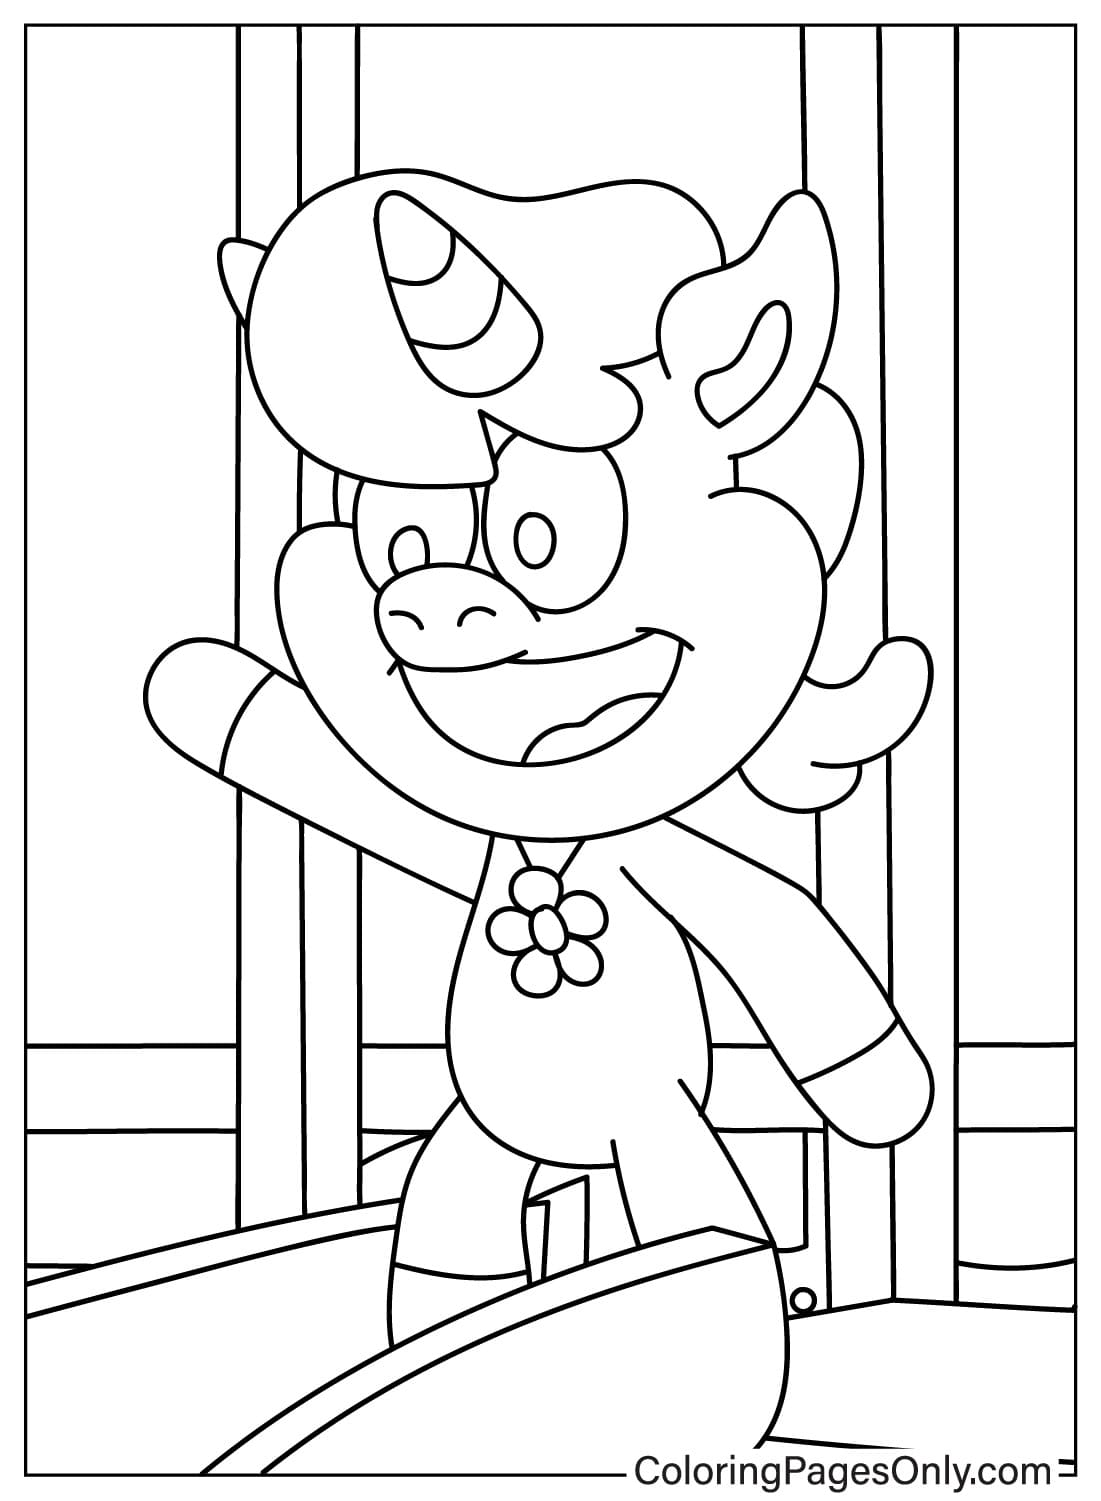 CraftyCorn Coloring Page for Kids from CraftyCorn